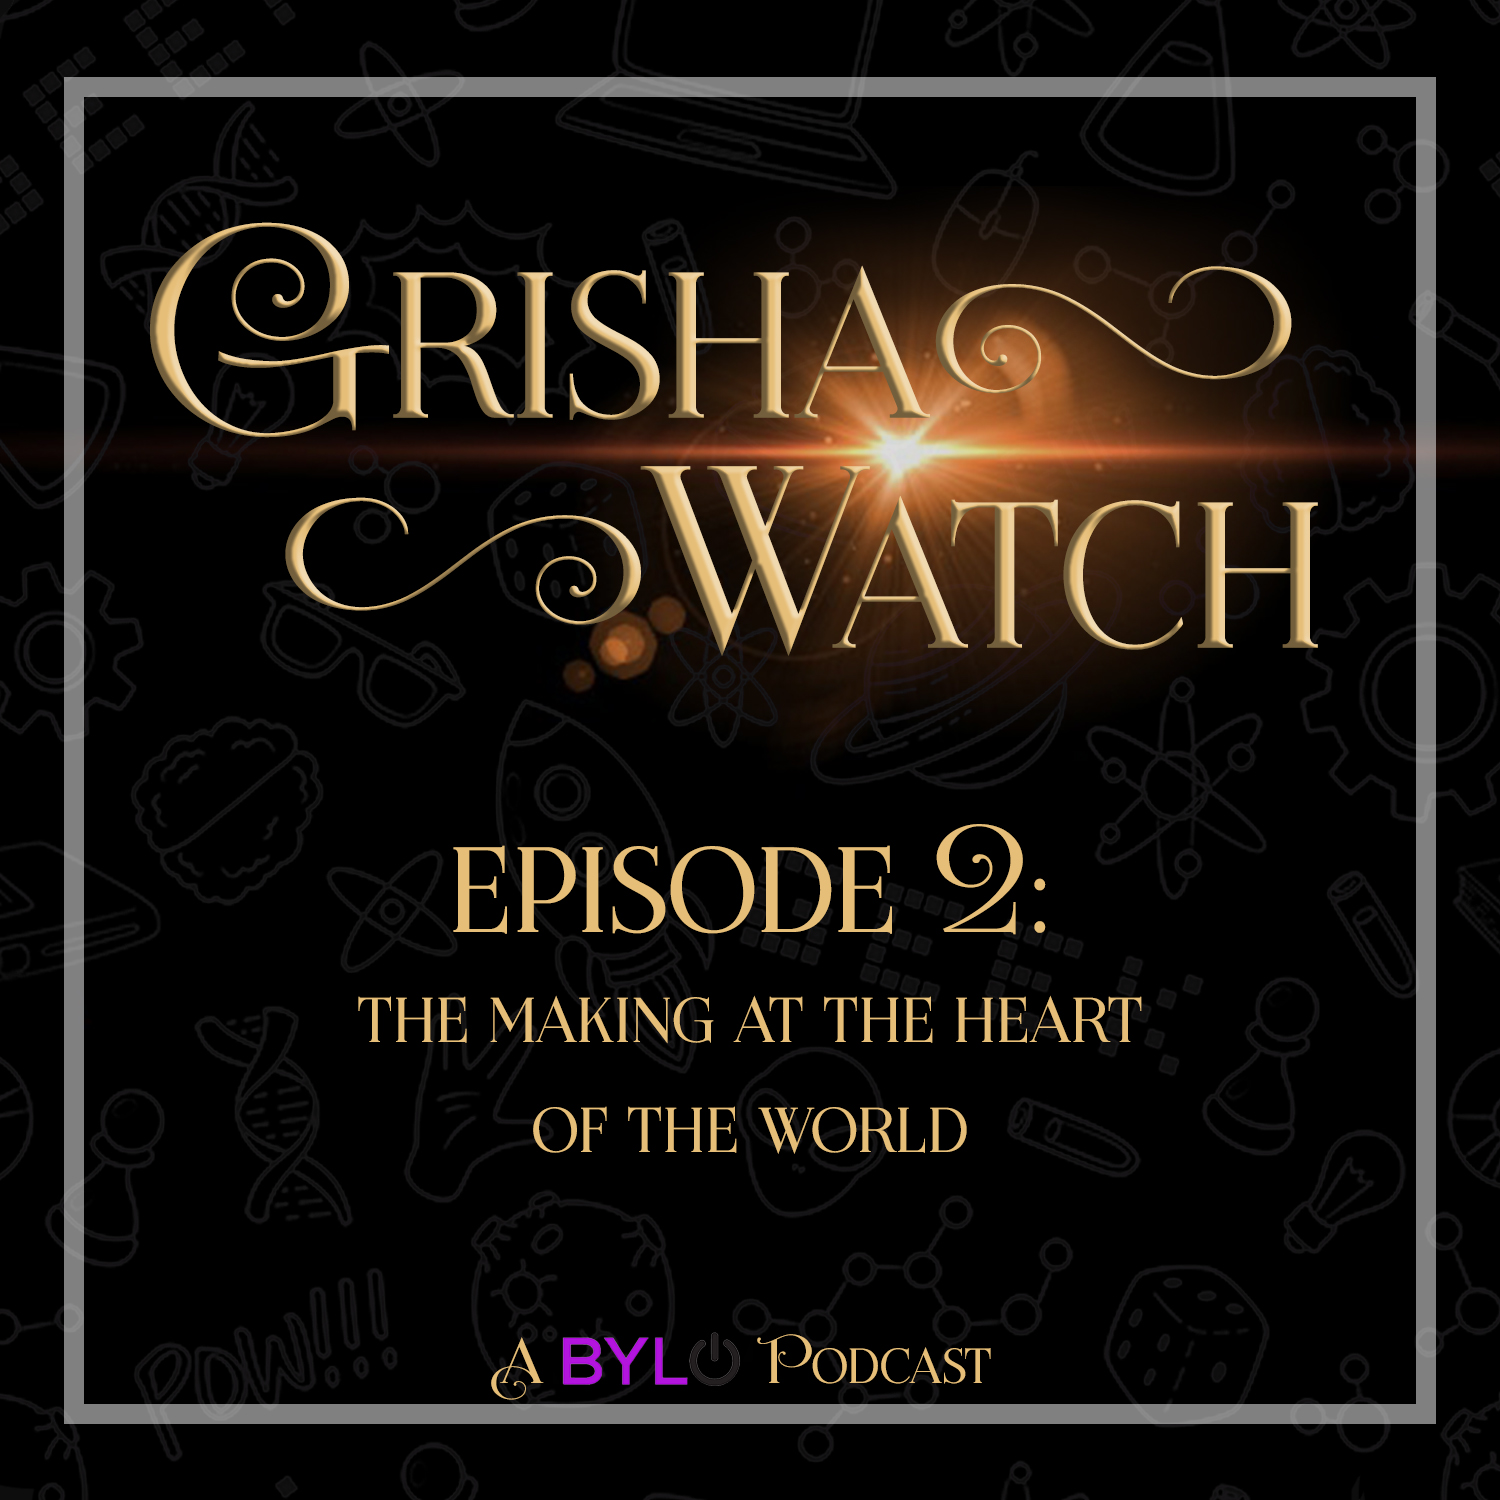 Grisha Watch ep 02: "The Making at the Heart of the World"